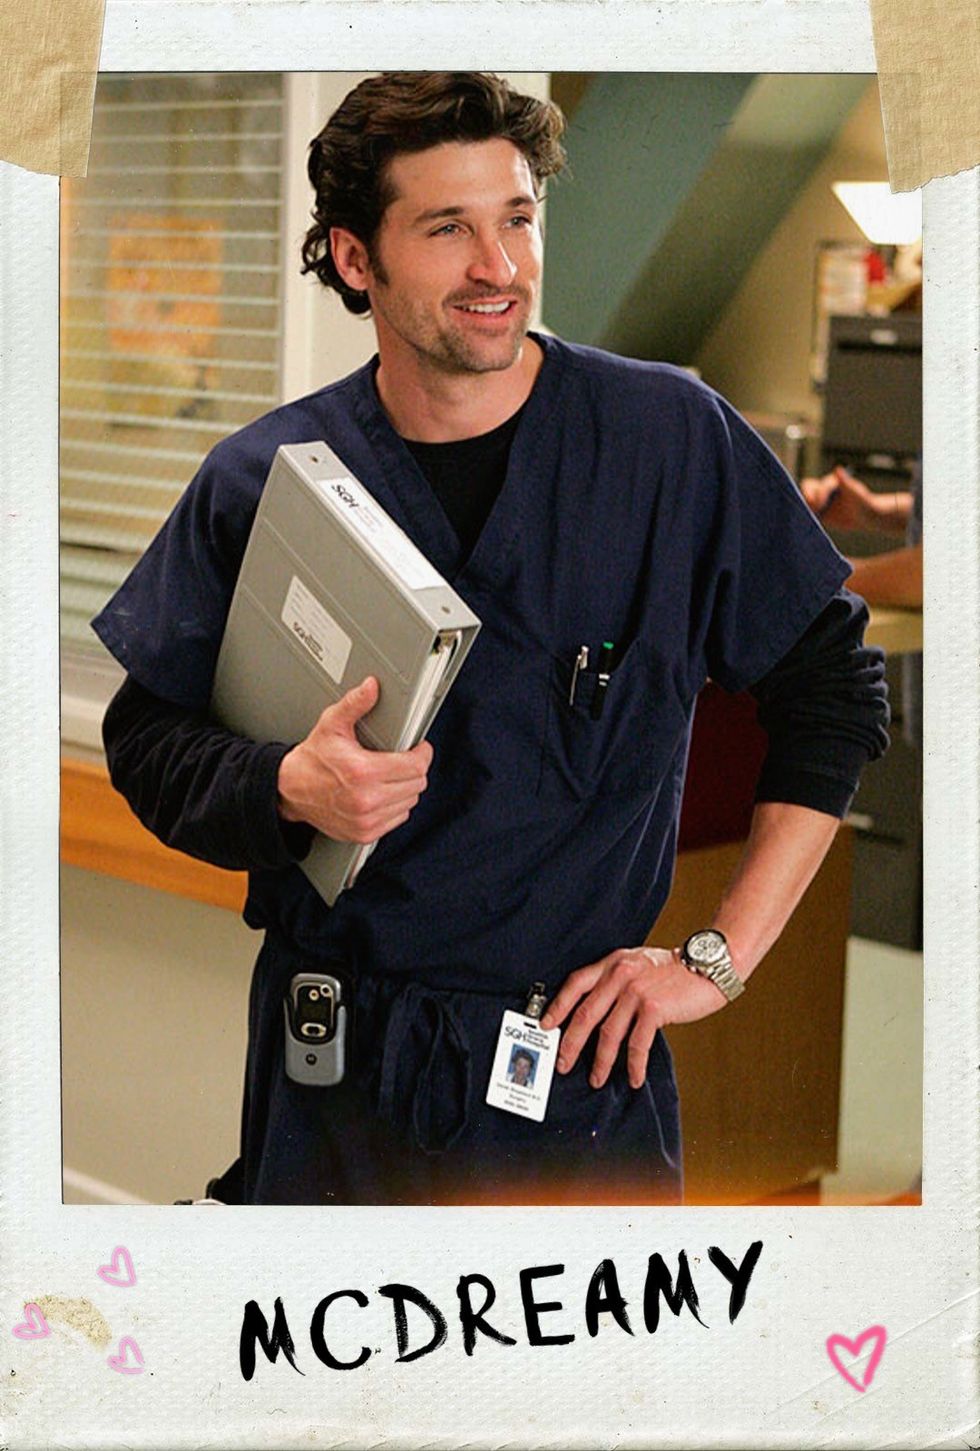 The Complete Guide To The Cast of Grey's Anatomy: What Happened and Where Are They Now? Dr. Derek Shepherd / Shonda Rhimes